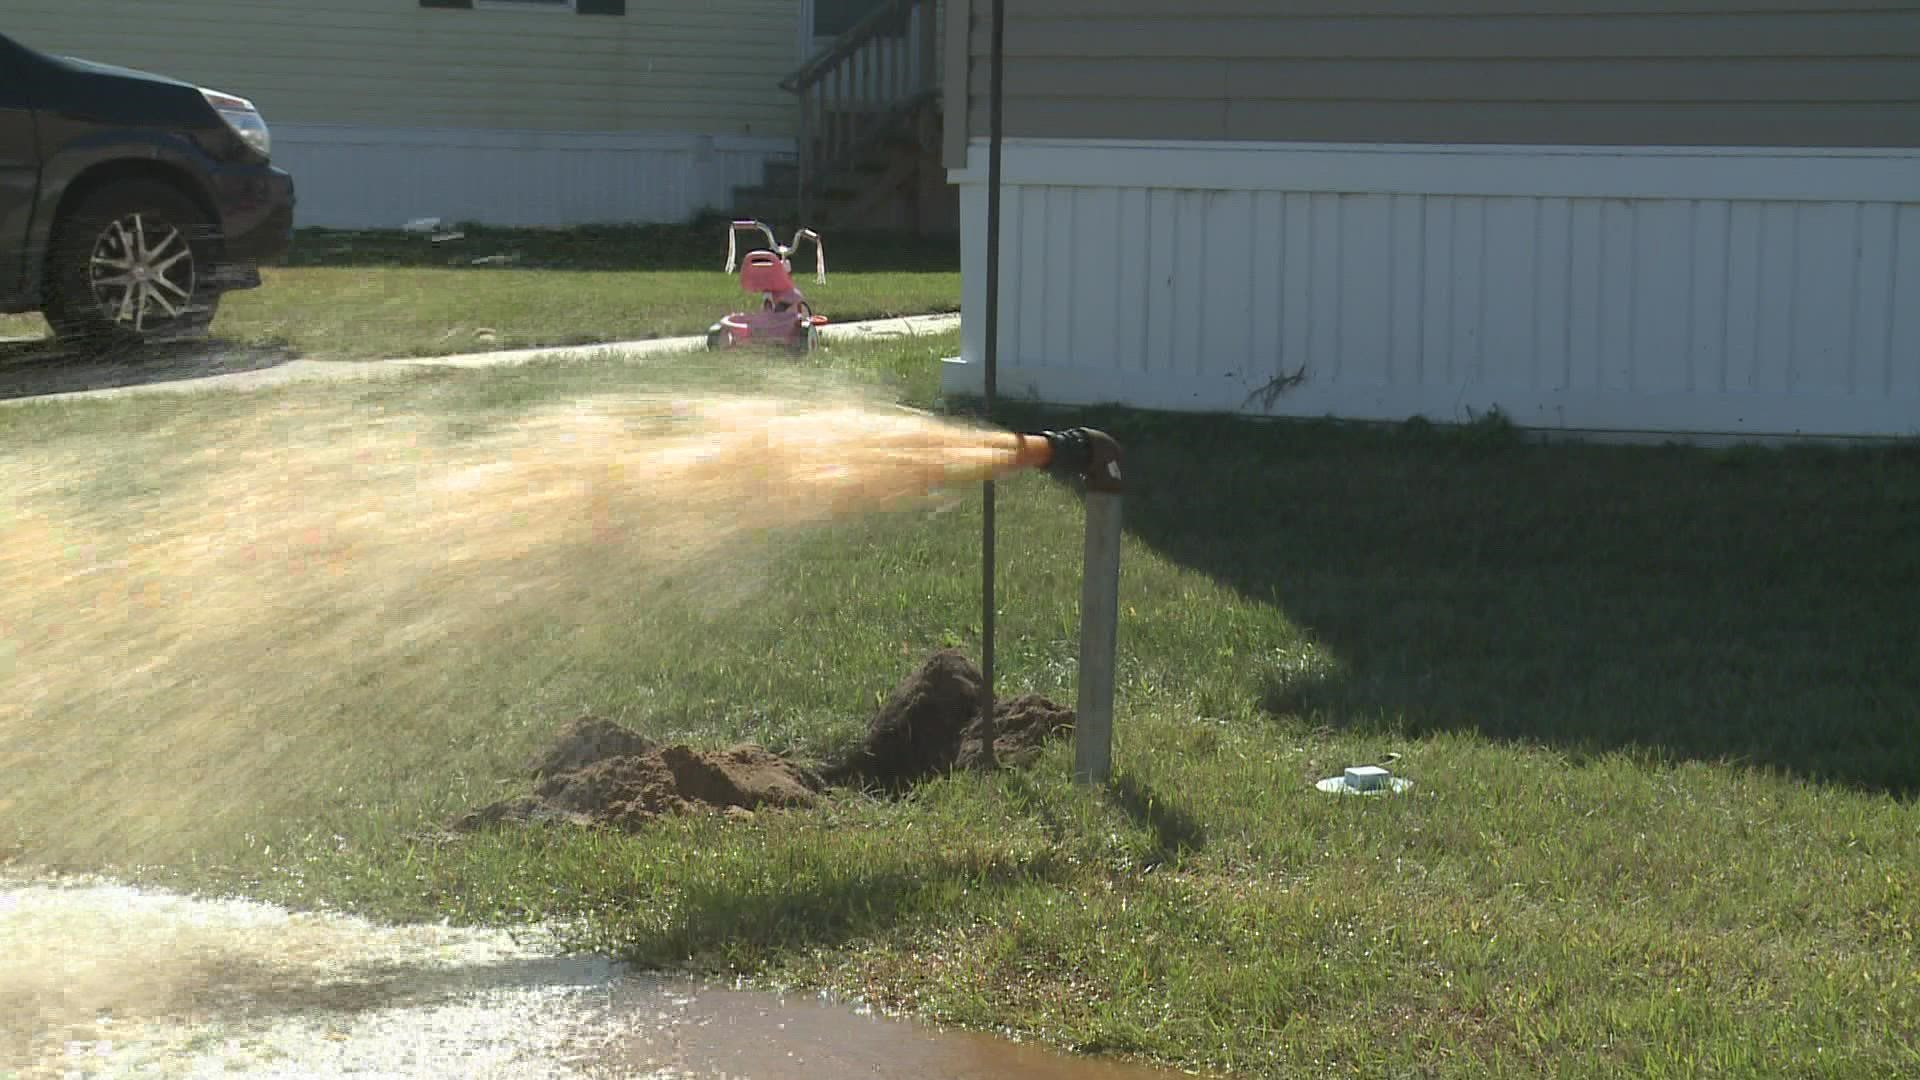 The state's drinking water regulator agency said four of the six wells in the Barry County mobile home park found high levels of nitrates and arsenic.